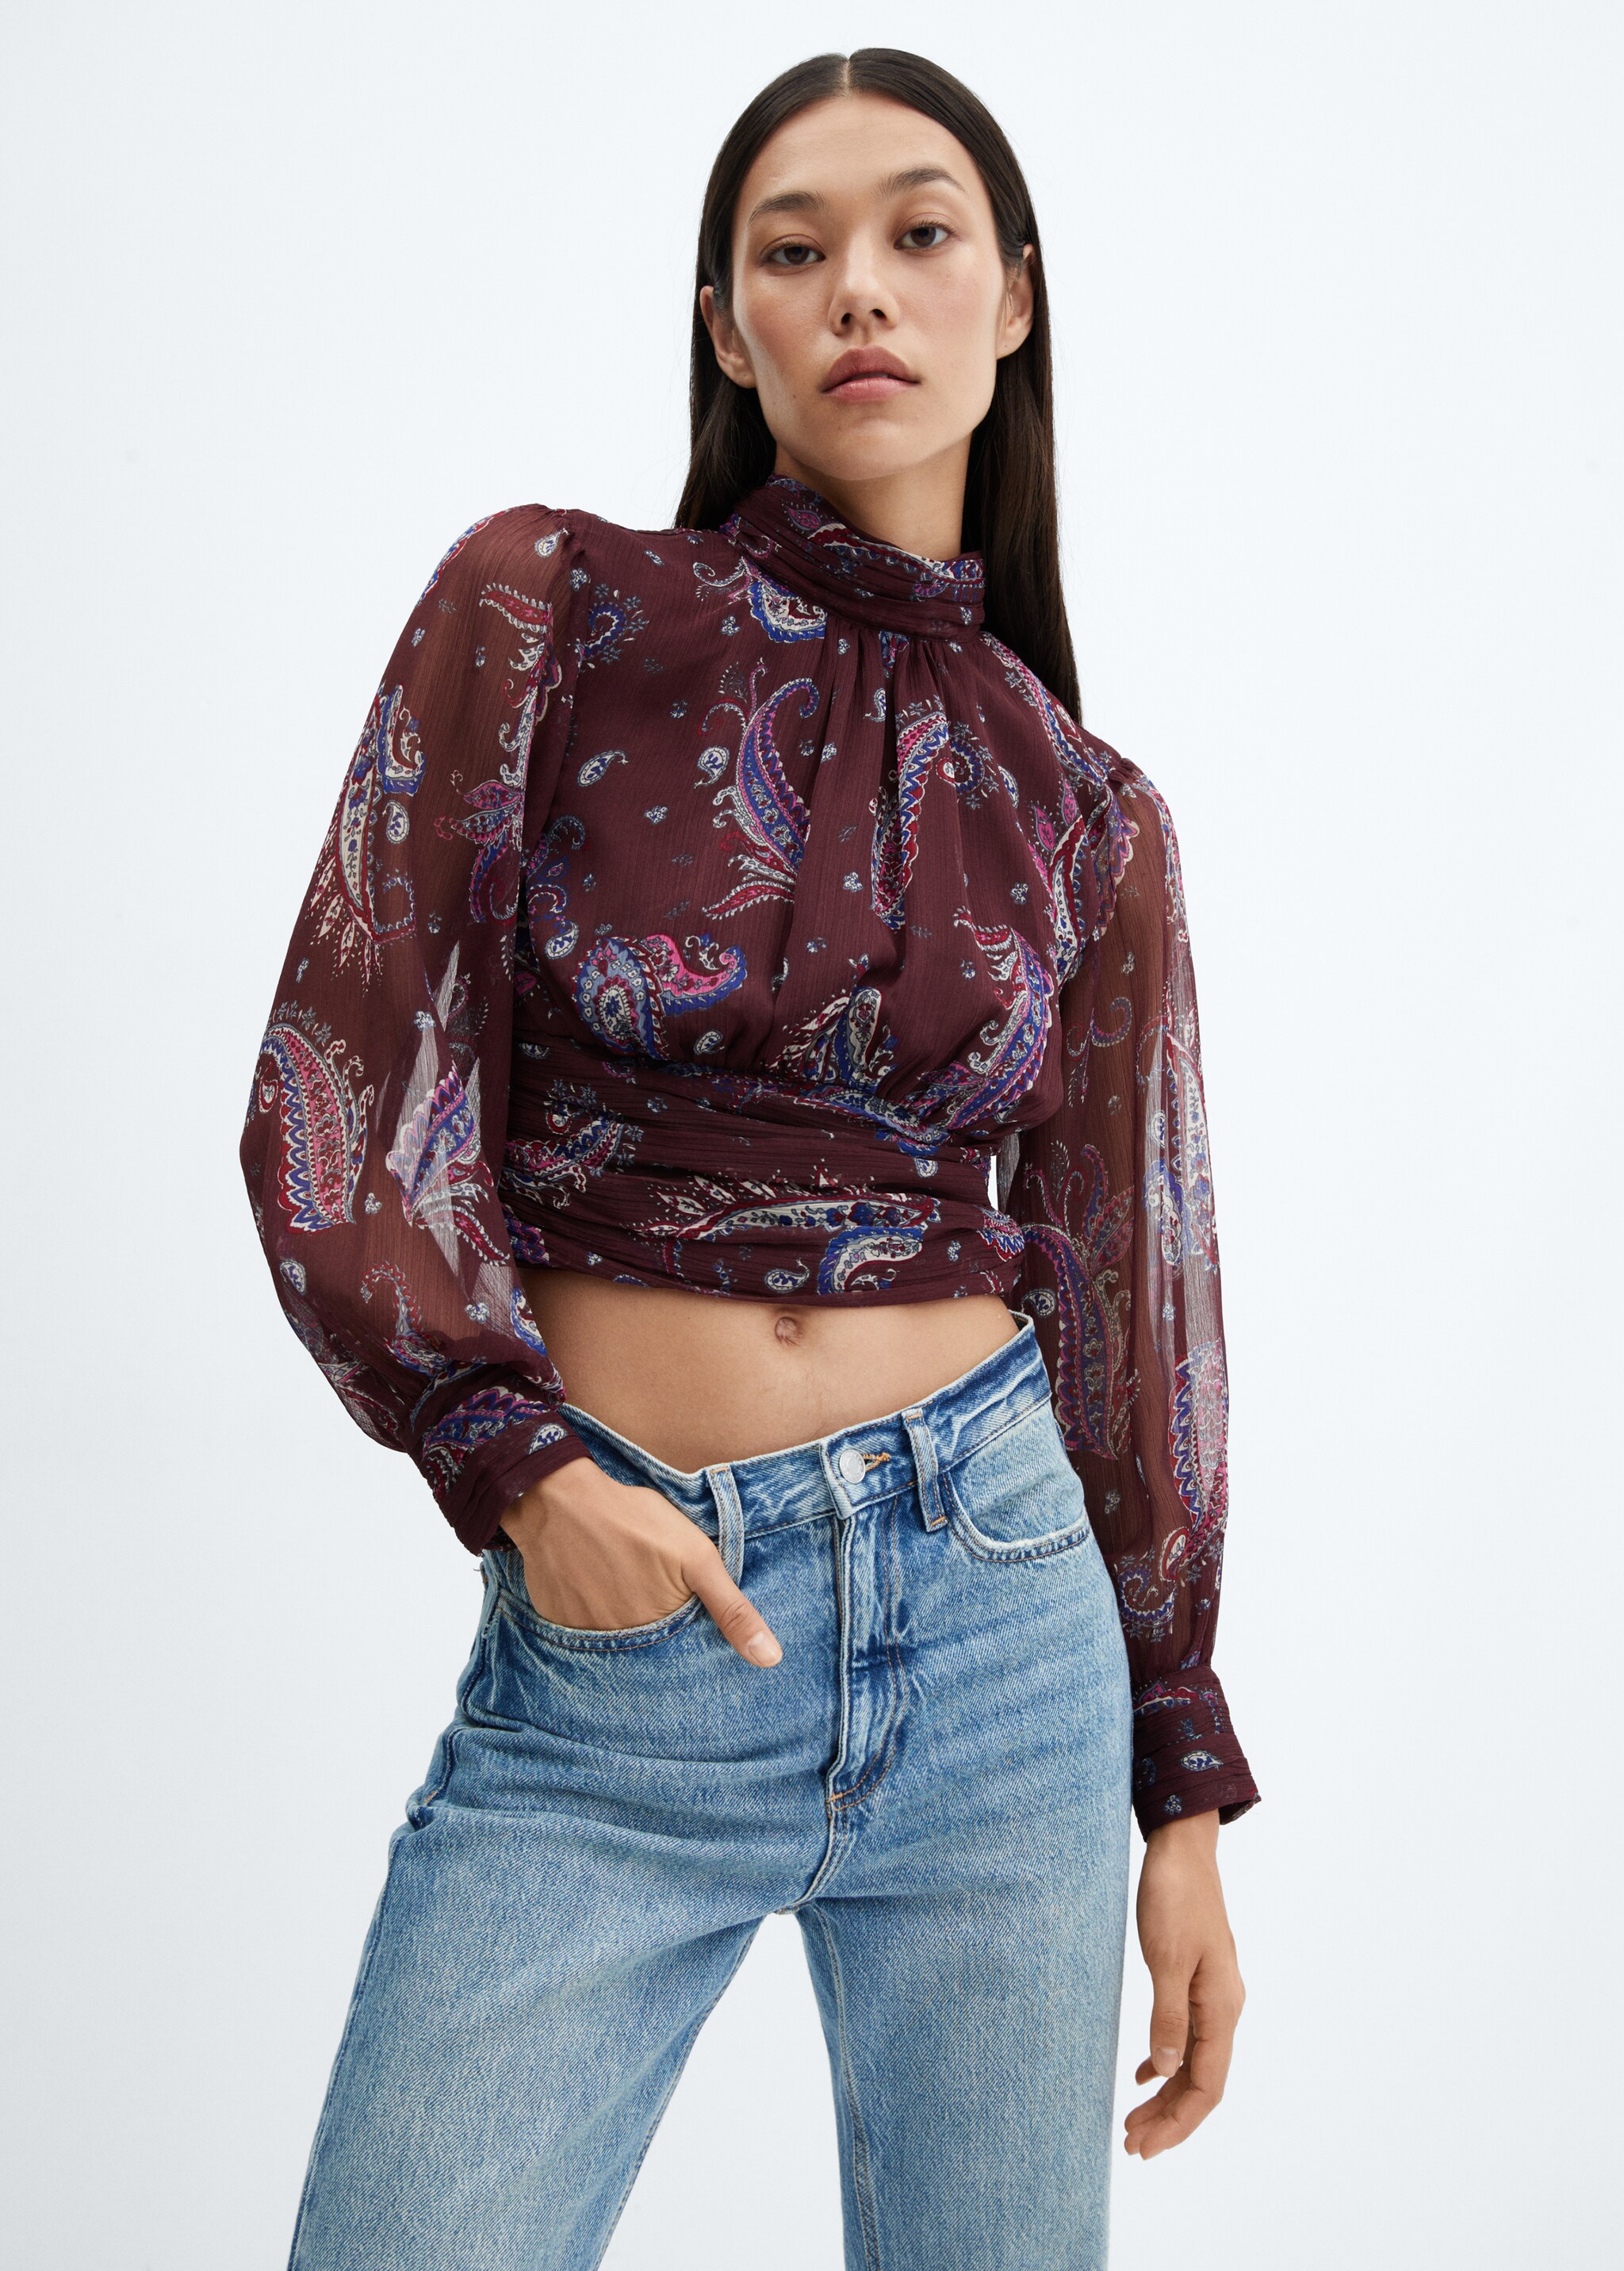 Paisley blouse with puffed sleeves - Medium plane